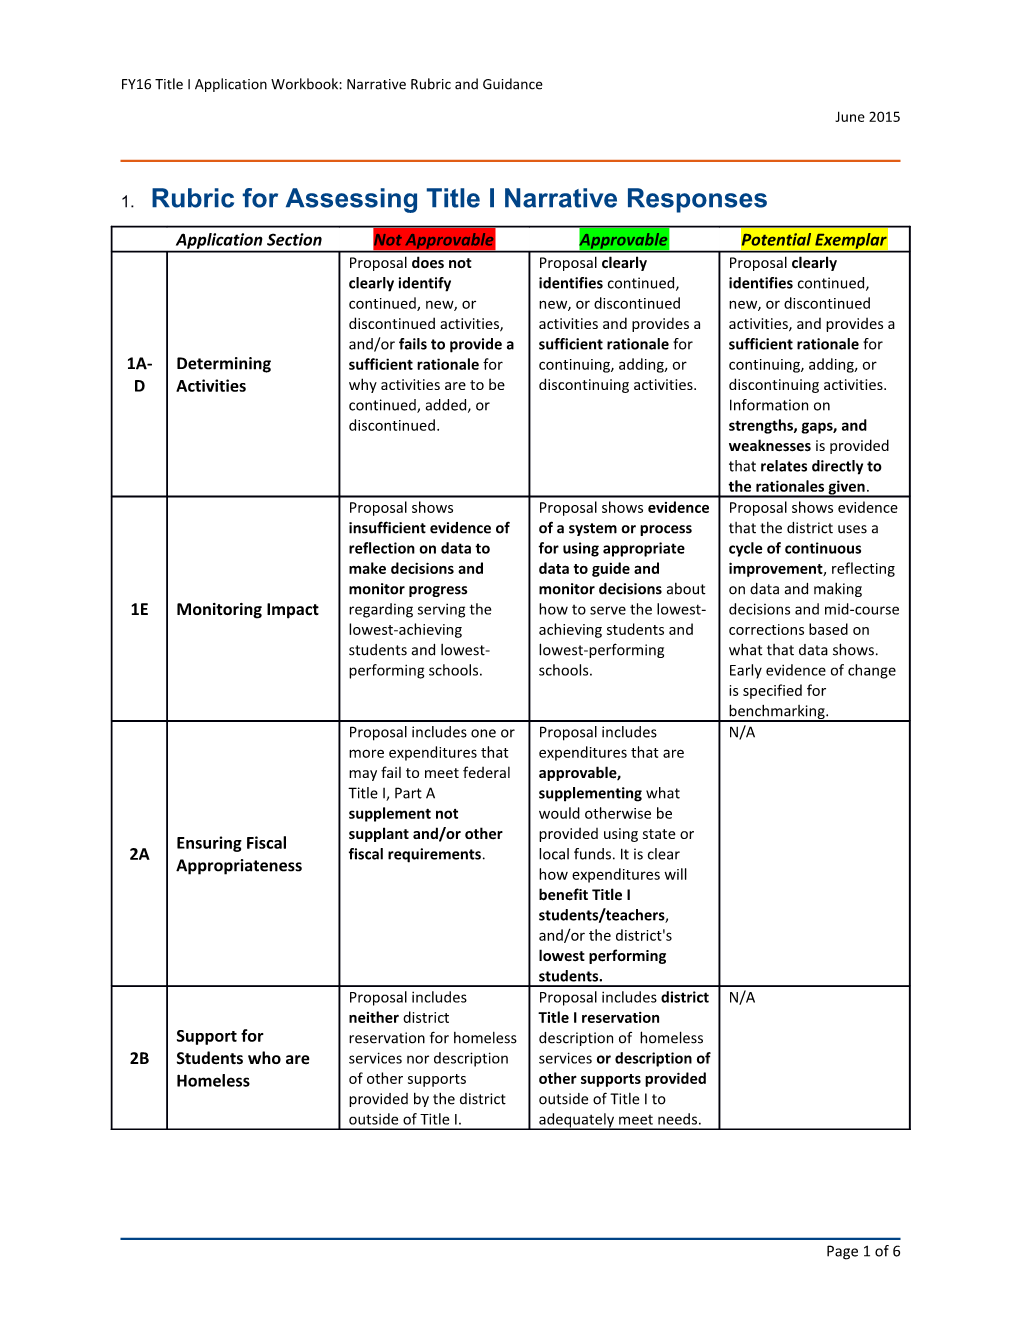 FY2016 Fund Code 305 Title I Narrative Rubric and Guidance